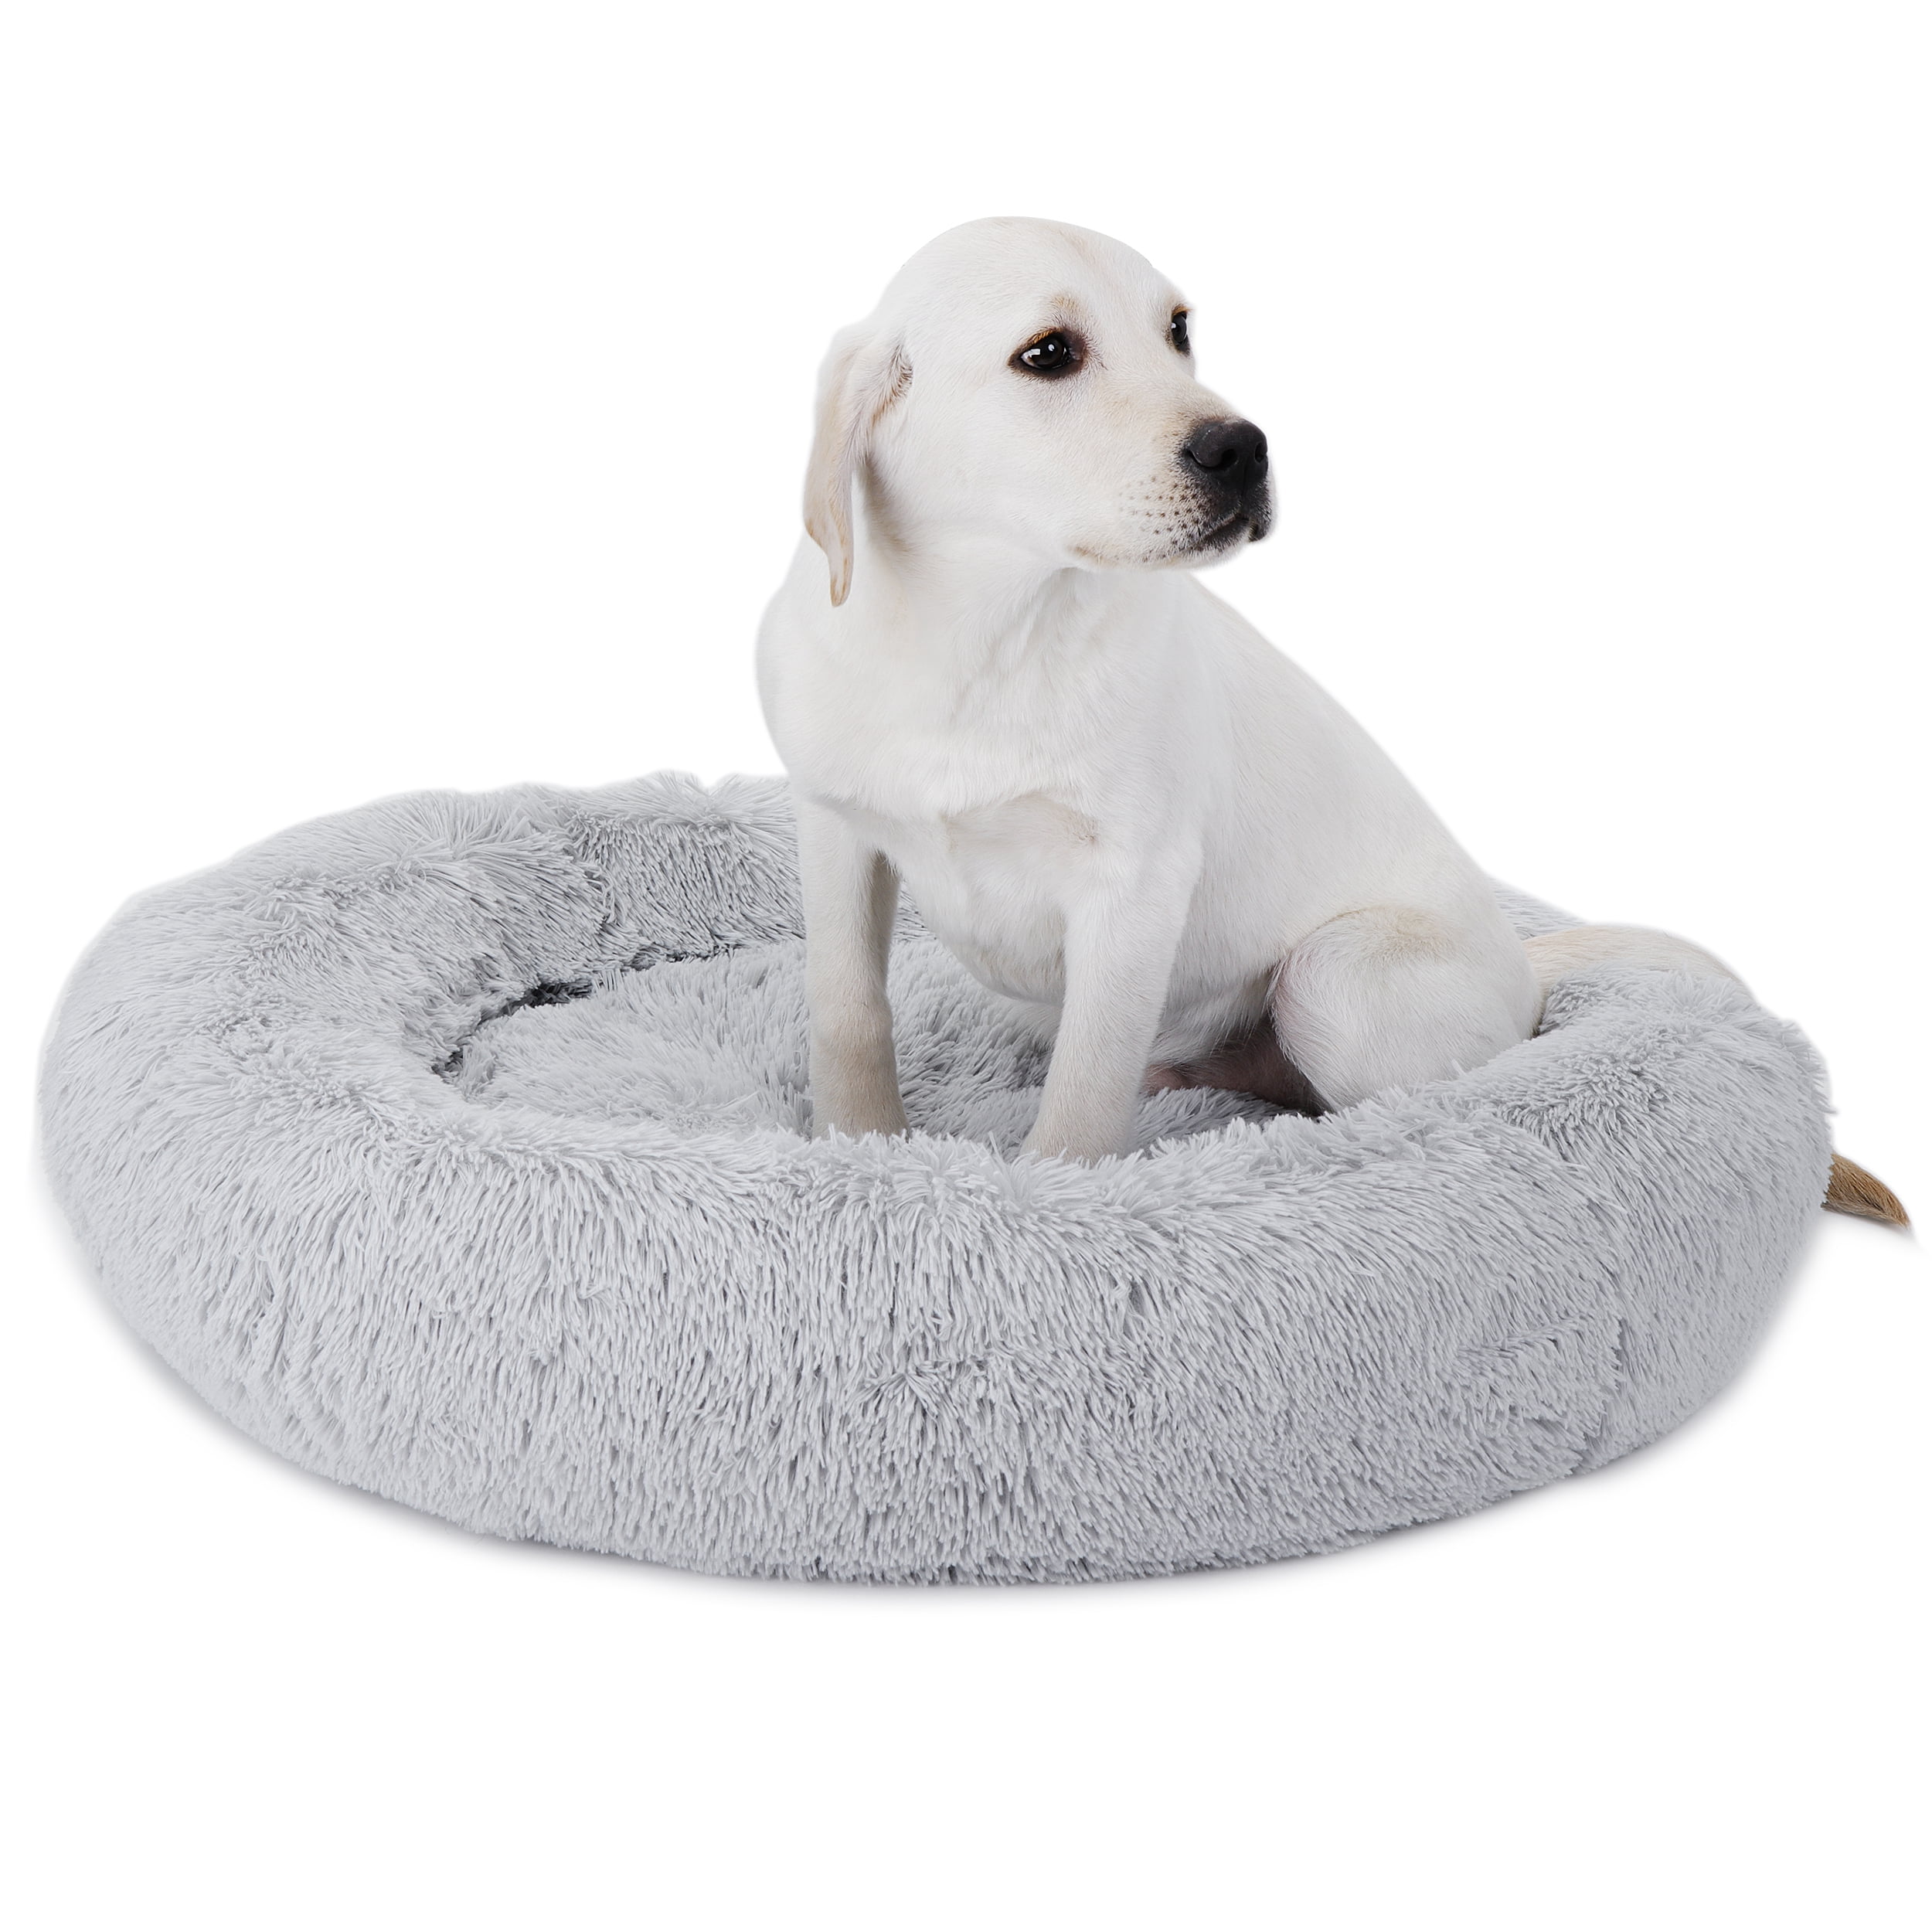 Padded Comfort Soft Shaggy Faux Fur Mongolian Sheepskin DogNappers Pet Bed Perfect For Cats Dogs or Humans Every Color and Size